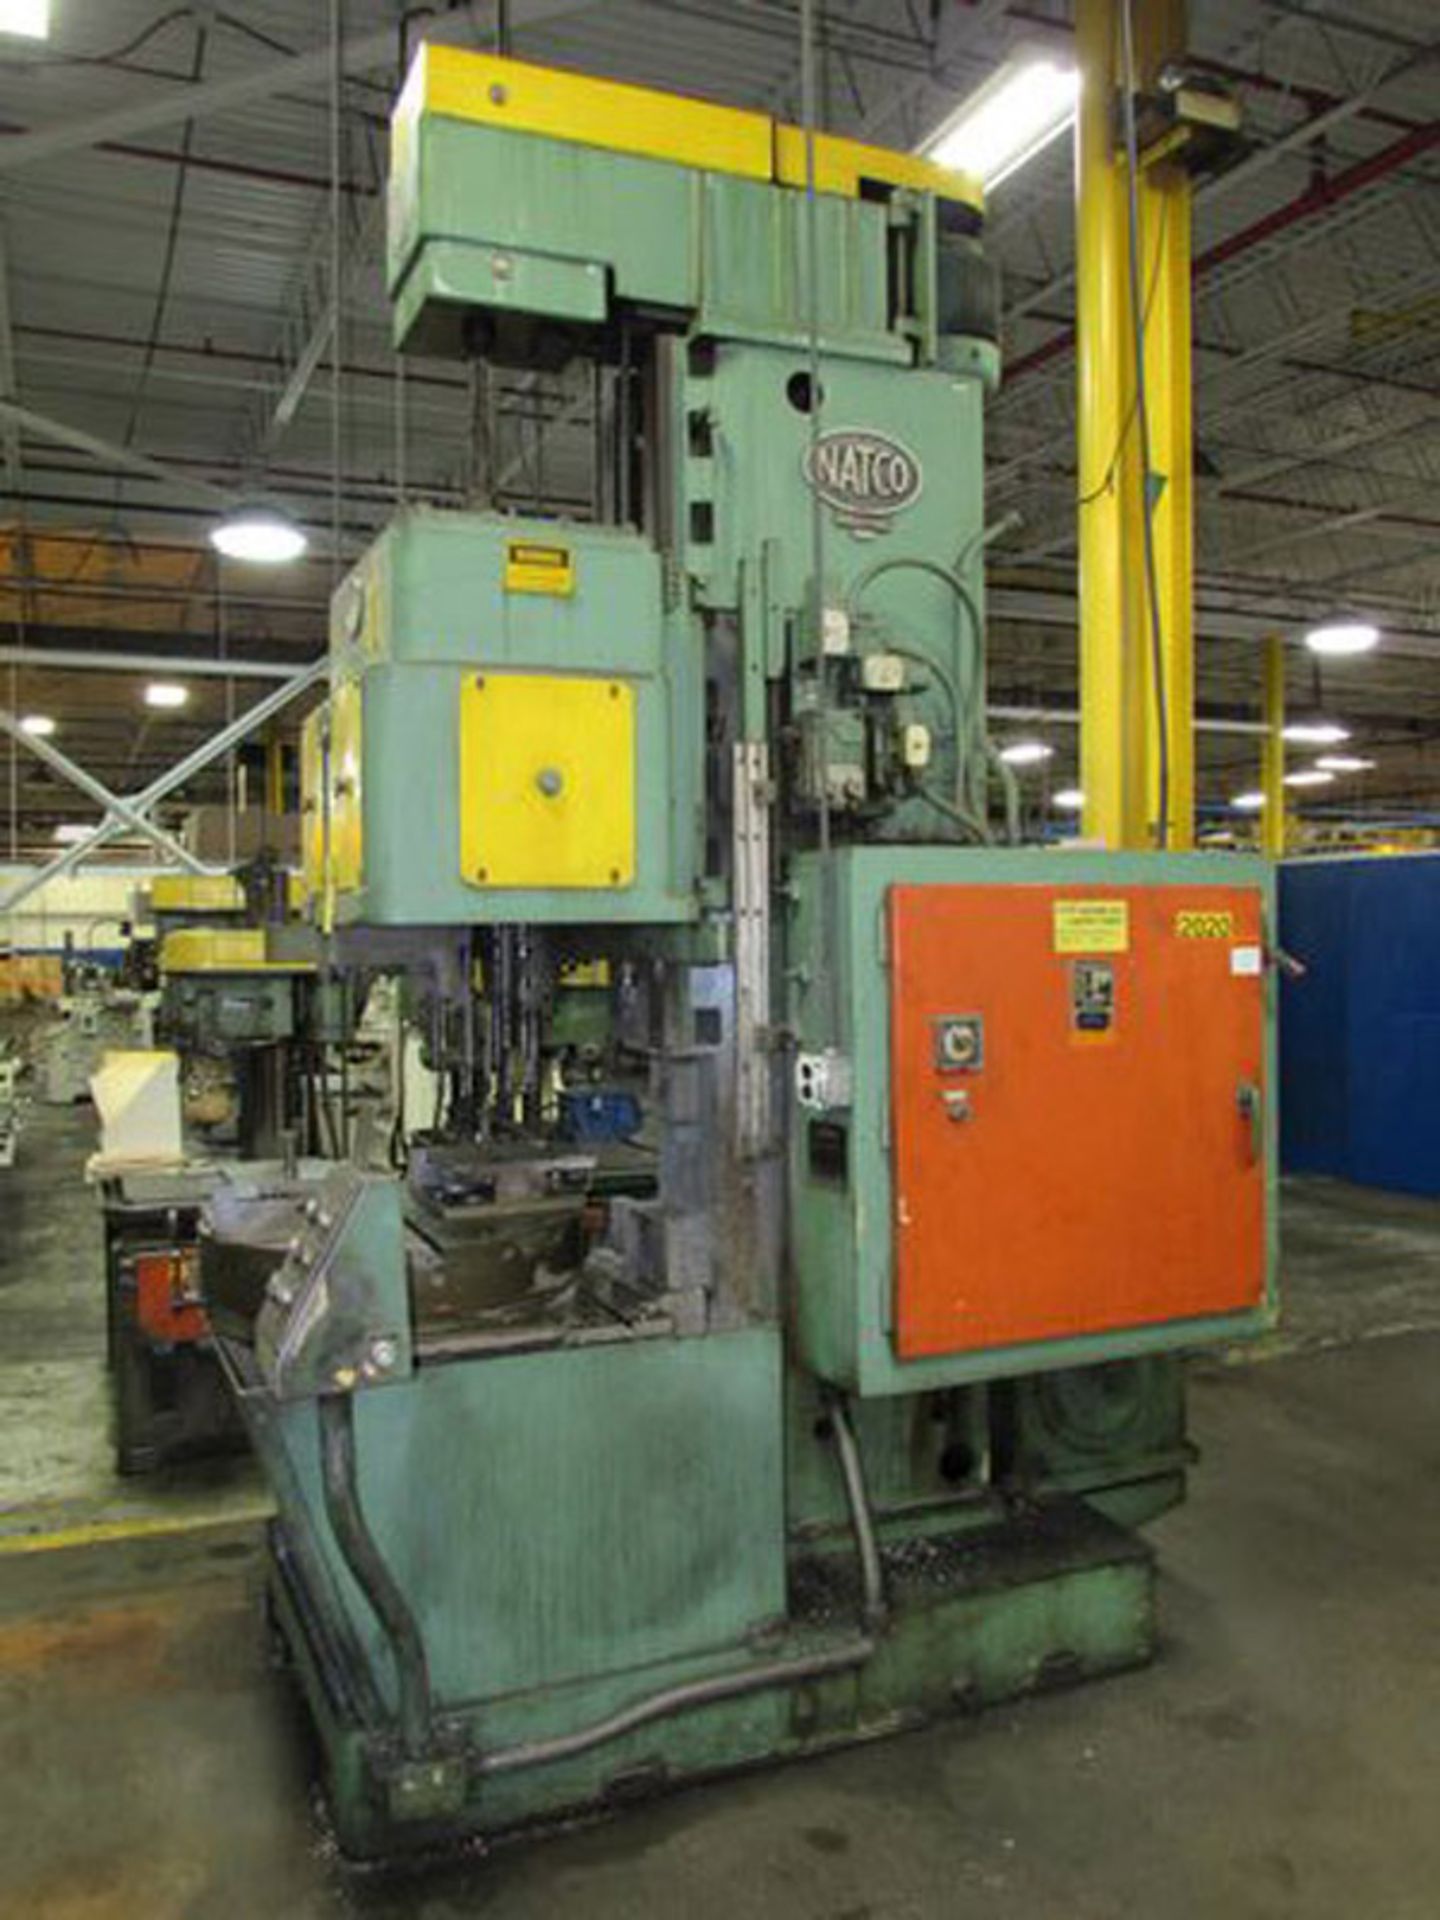 Natco Holesteel Multiple Spindle Drill, 24 Spindle Drivers - 8 Spindles, Mdl: G210, S/N: G210-149 ( - Image 3 of 6